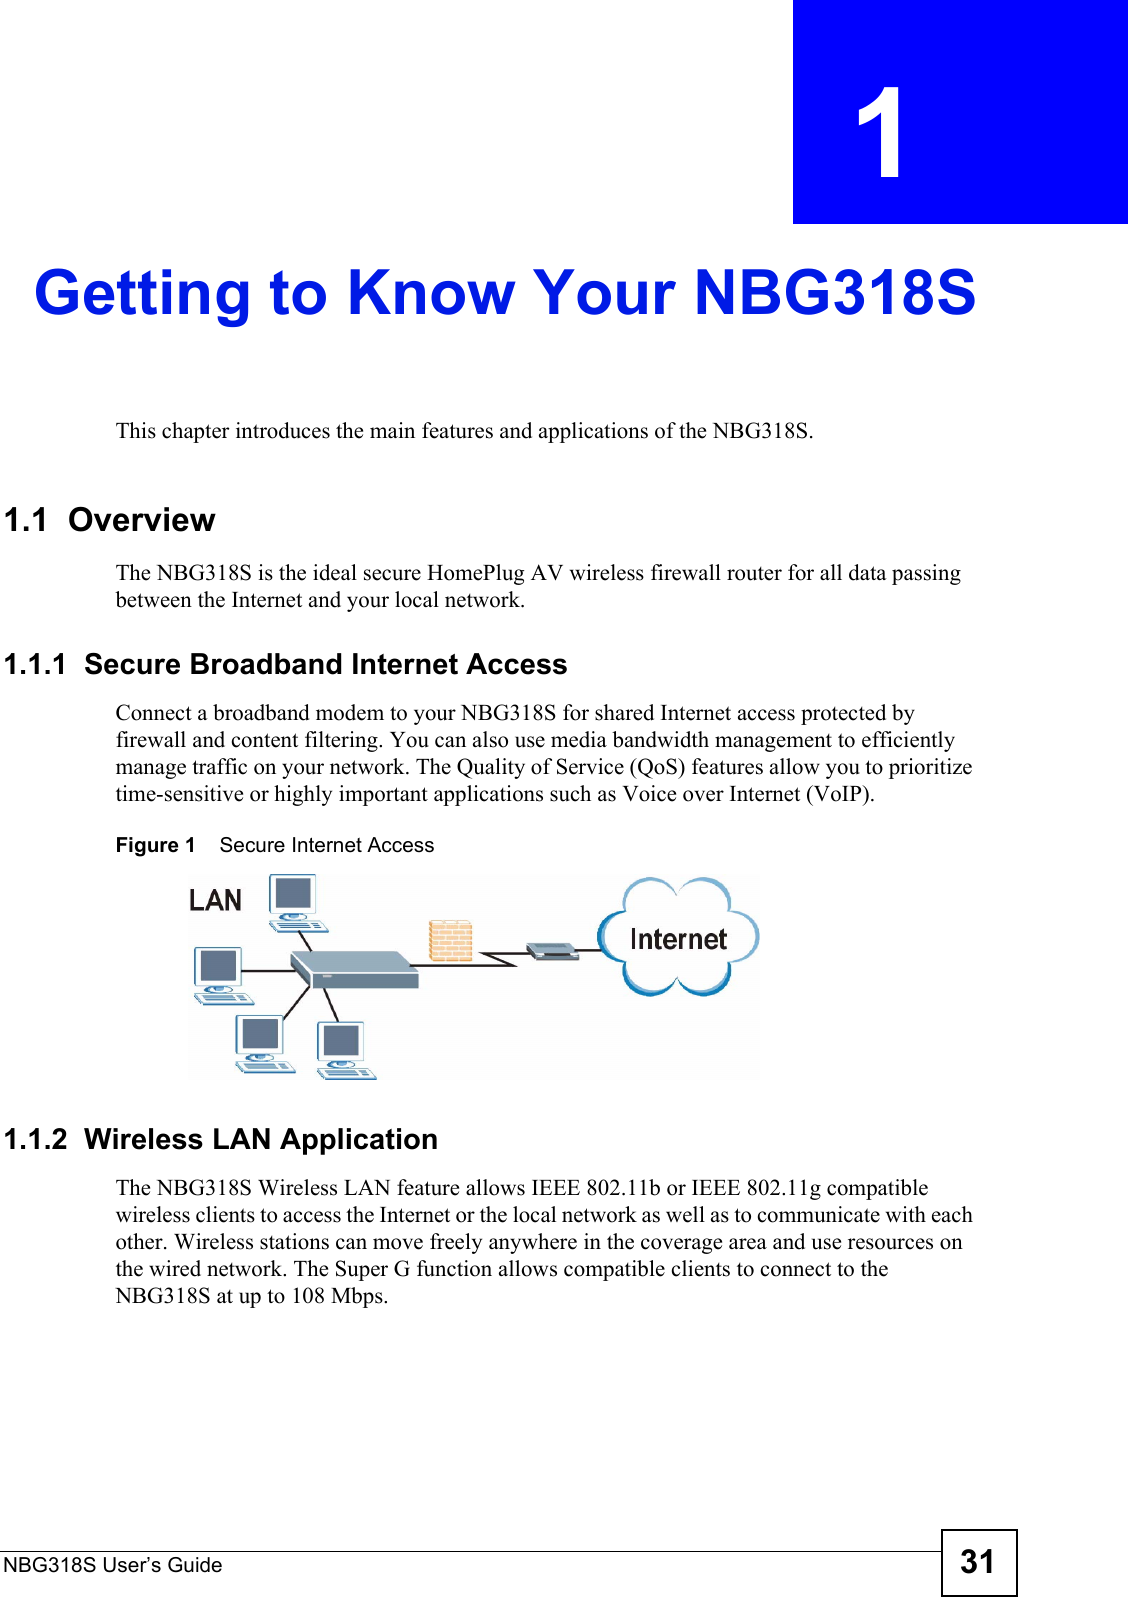 NBG318S User’s Guide 31CHAPTER  1 Getting to Know Your NBG318SThis chapter introduces the main features and applications of the NBG318S.1.1  OverviewThe NBG318S is the ideal secure HomePlug AV wireless firewall router for all data passing between the Internet and your local network.1.1.1  Secure Broadband Internet Access Connect a broadband modem to your NBG318S for shared Internet access protected by firewall and content filtering. You can also use media bandwidth management to efficiently manage traffic on your network. The Quality of Service (QoS) features allow you to prioritize time-sensitive or highly important applications such as Voice over Internet (VoIP).Figure 1    Secure Internet Access 1.1.2  Wireless LAN ApplicationThe NBG318S Wireless LAN feature allows IEEE 802.11b or IEEE 802.11g compatible wireless clients to access the Internet or the local network as well as to communicate with each other. Wireless stations can move freely anywhere in the coverage area and use resources on the wired network. The Super G function allows compatible clients to connect to the NBG318S at up to 108 Mbps.